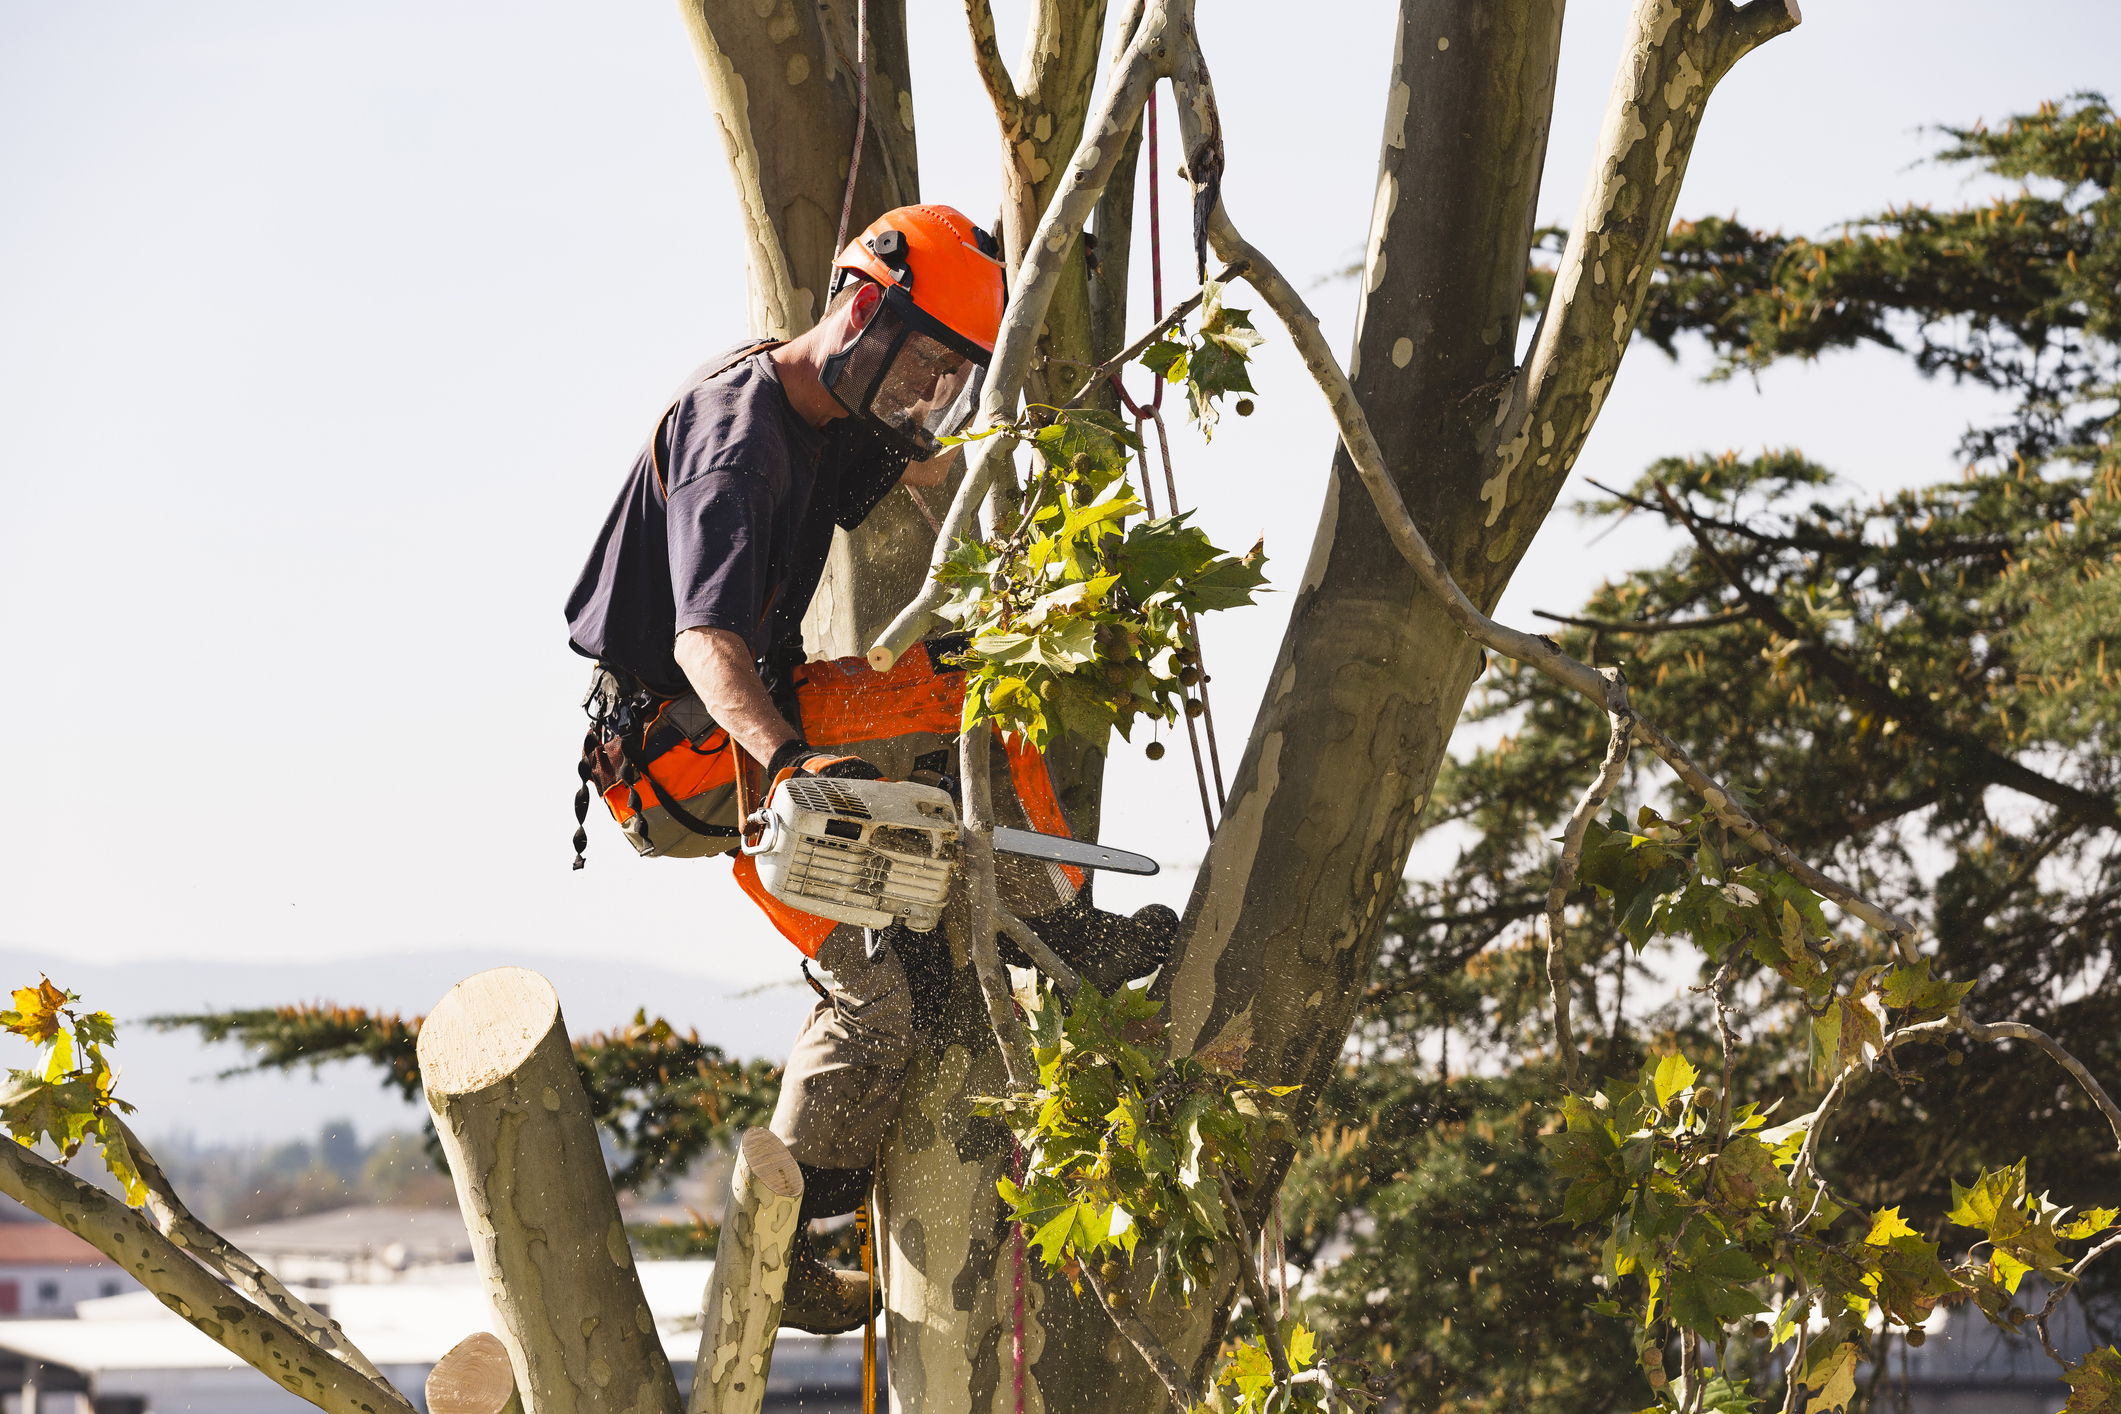 Man sawing tree at the top of the tree with chainsaw and all safety equipment needed for cutting the tree tops.